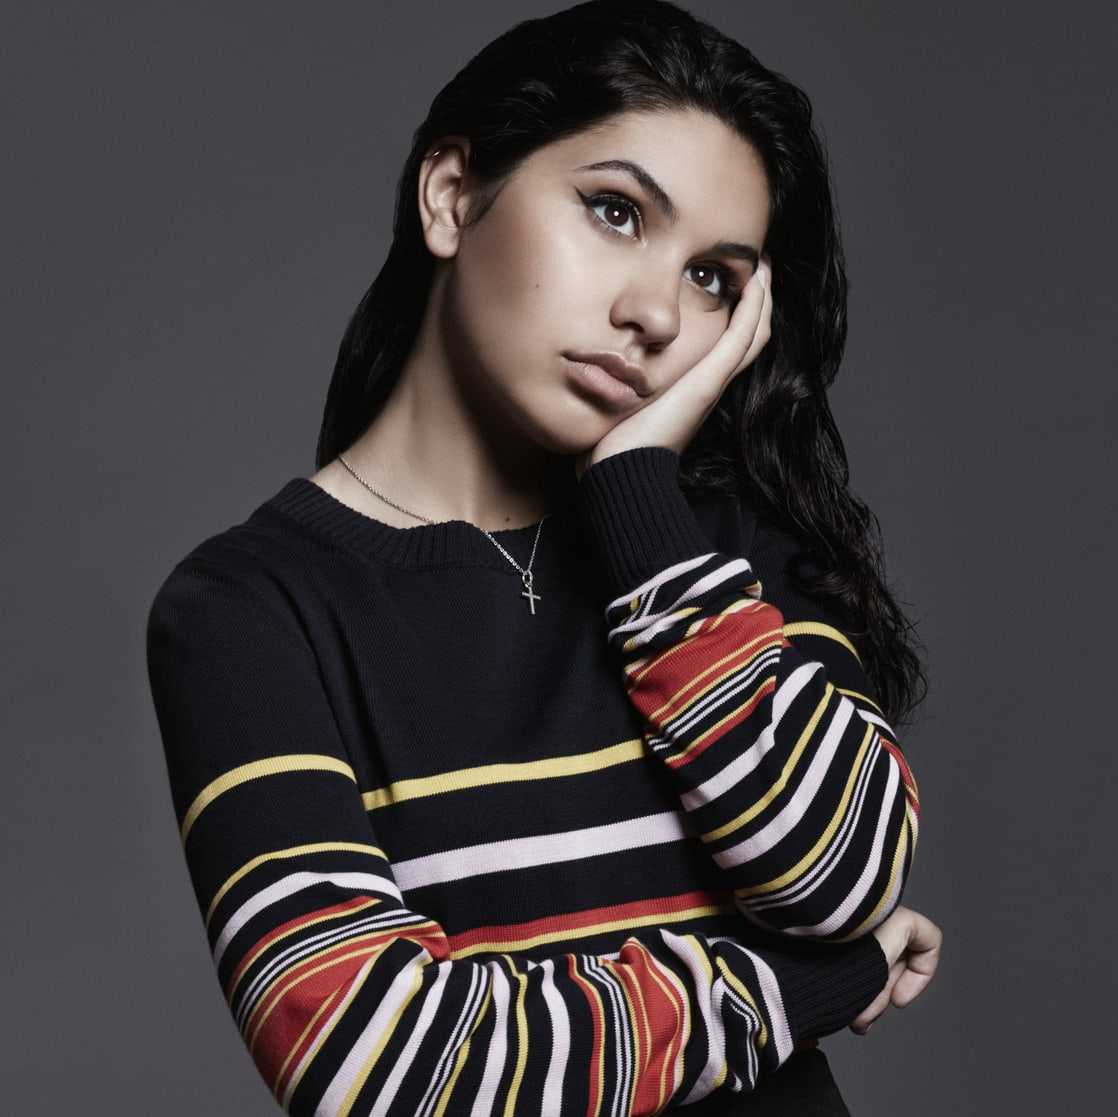 49 Alessia Cara Hot Pictures Are Too Delicious For All Her Fans | Best Of Comic Books